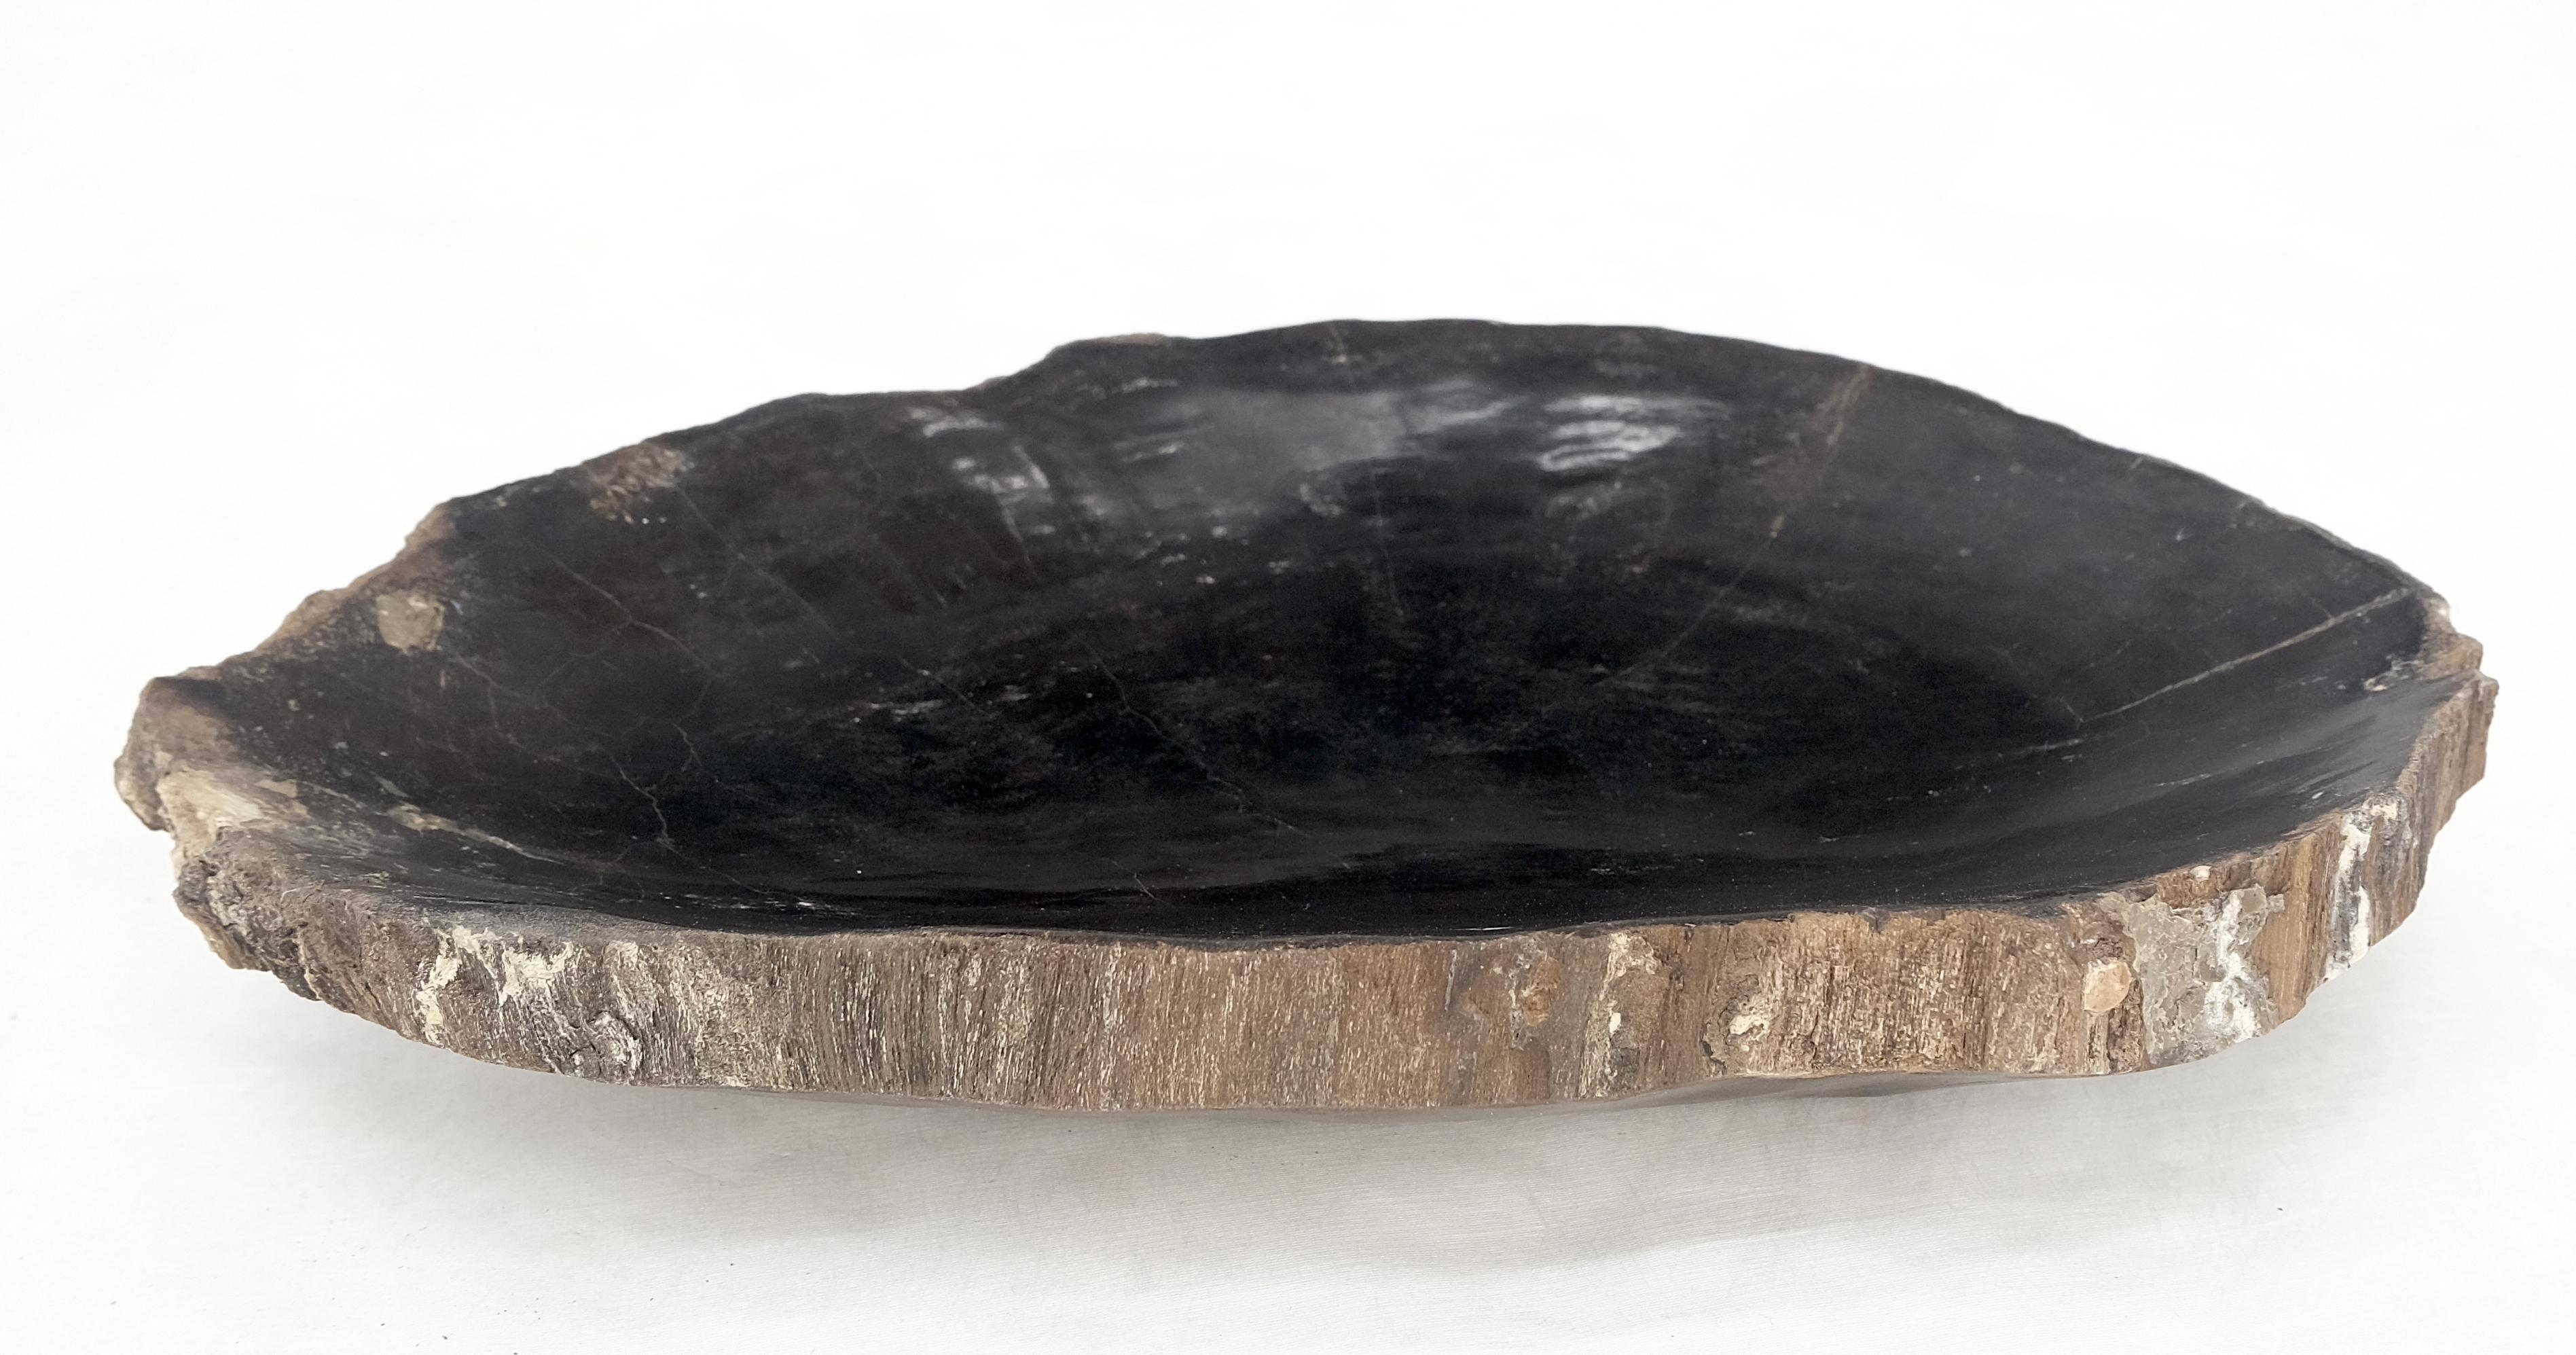 Petrified Wood Heart Shape Solid Black Elongated Bowl Dish Large Plate Ashtray In Excellent Condition For Sale In Rockaway, NJ